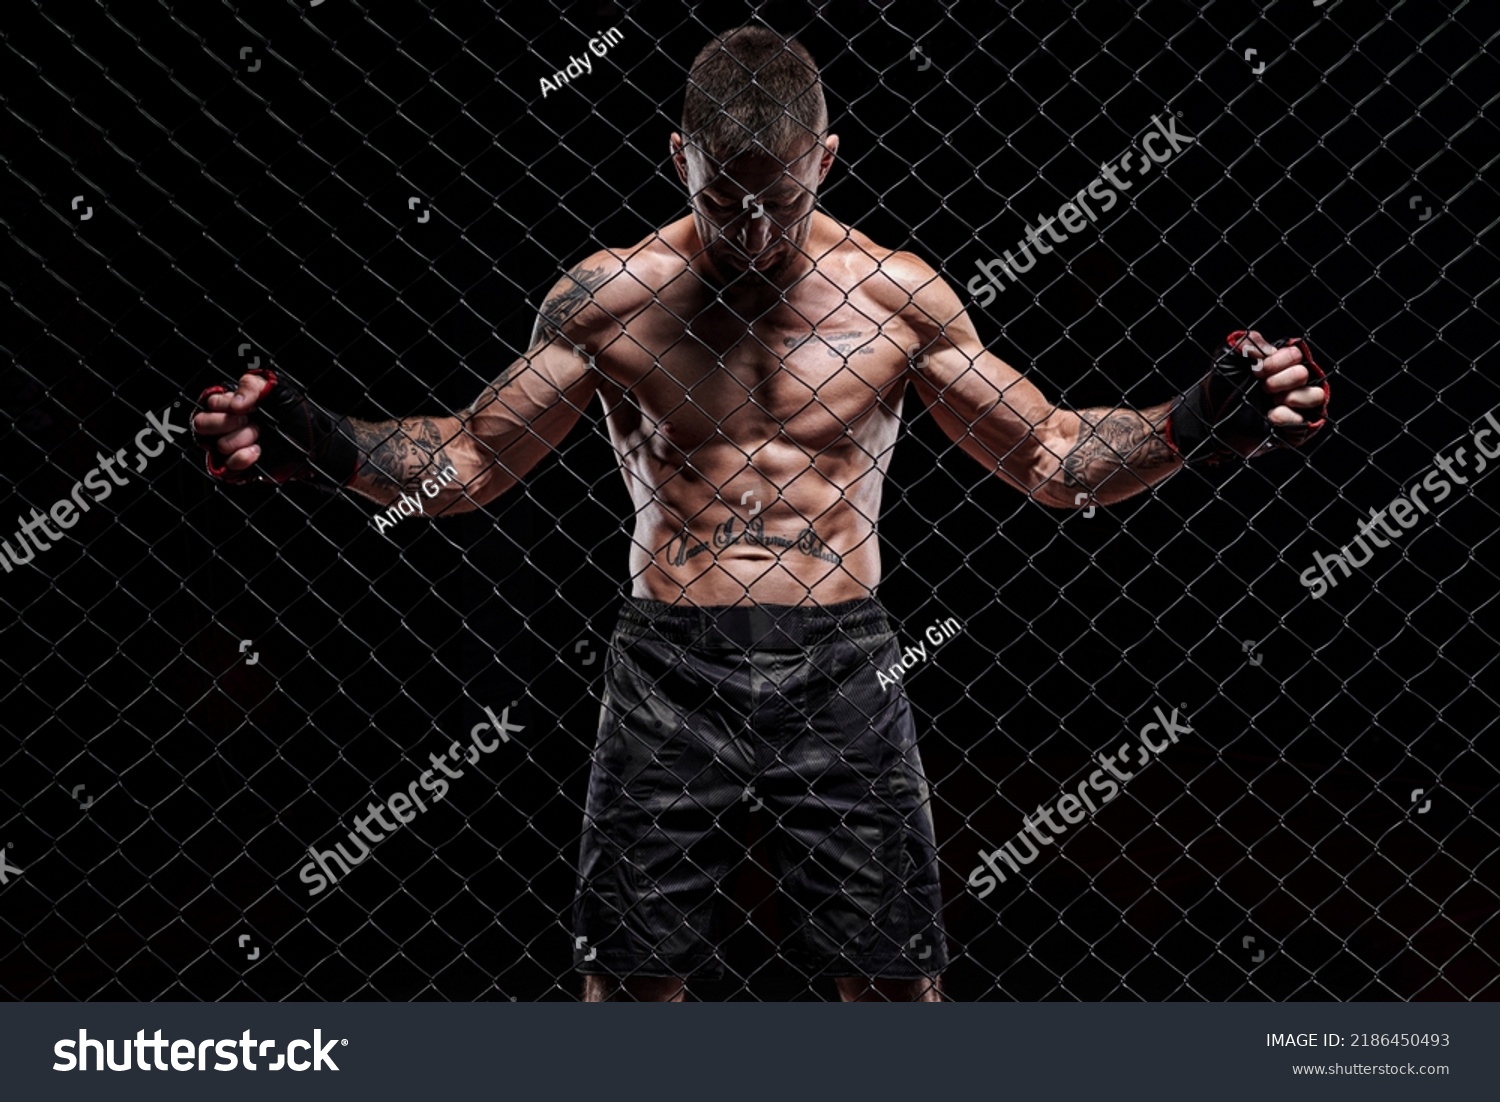 Dramatic image of a mixed martial arts fighter standing in an octagon cage. The concept of sports, boxing, martial arts.  #2186450493